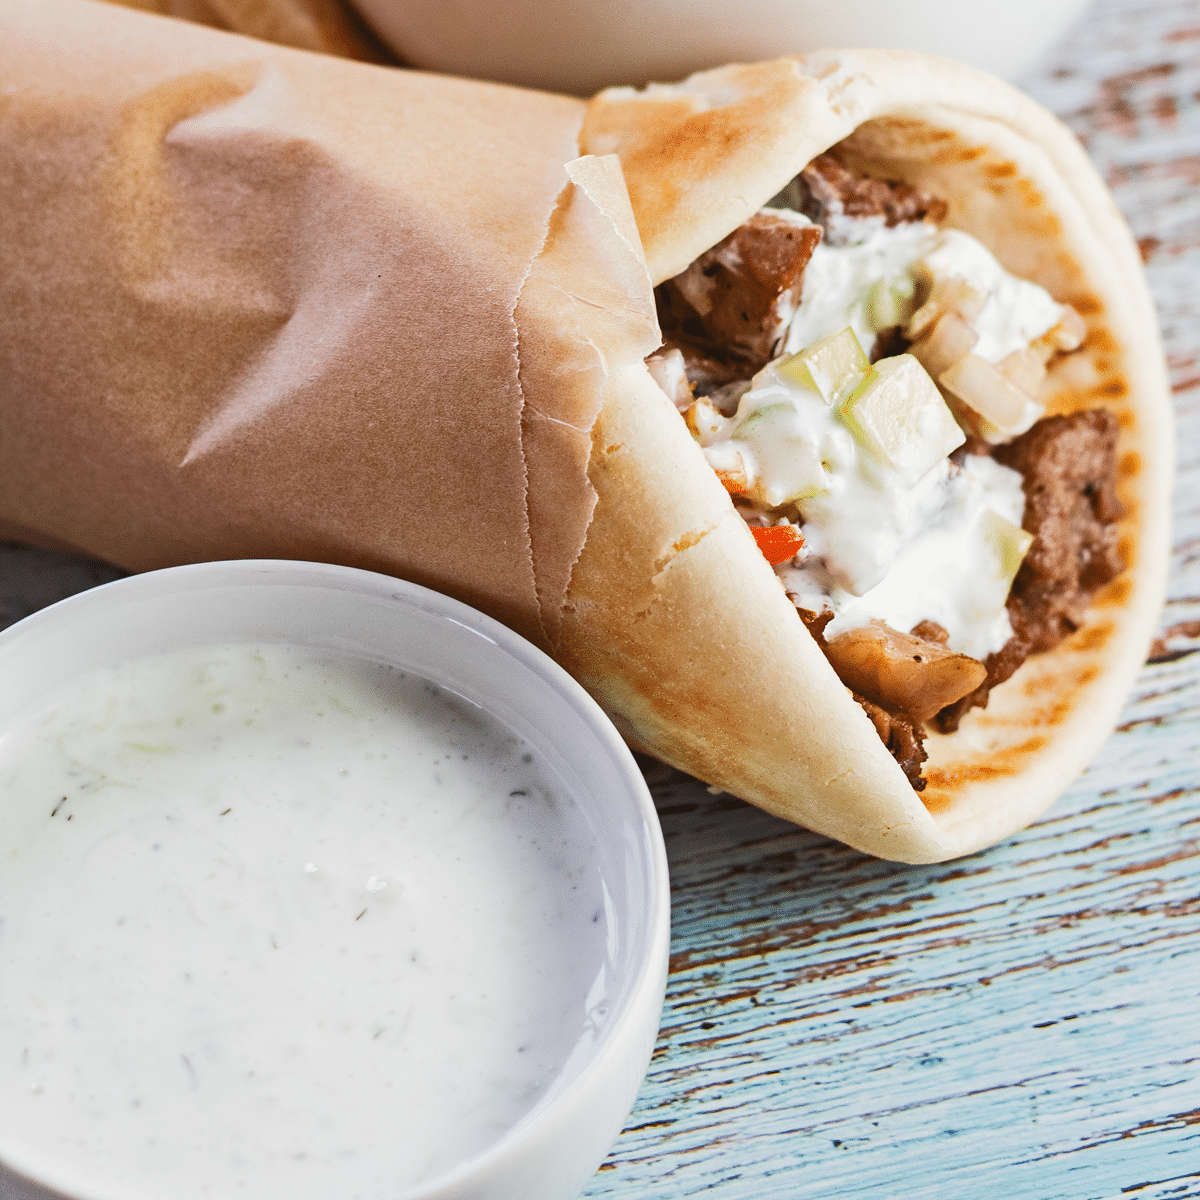 Tasty tzatziki sauce pairs well with this lamb gyros sandwich!